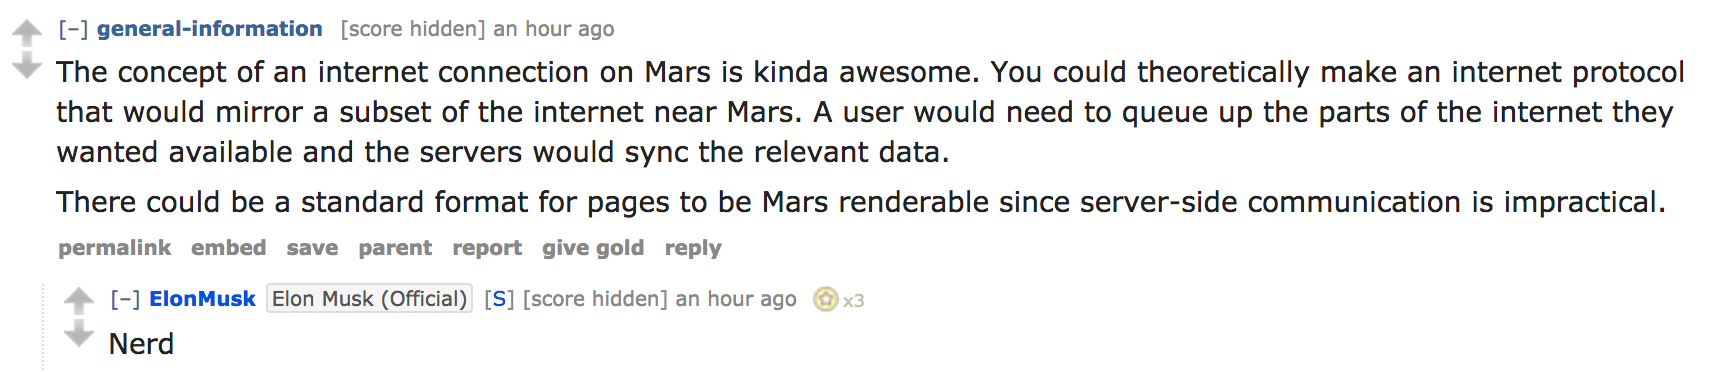 Elon Musk banters and answers rocketry questions on Reddit